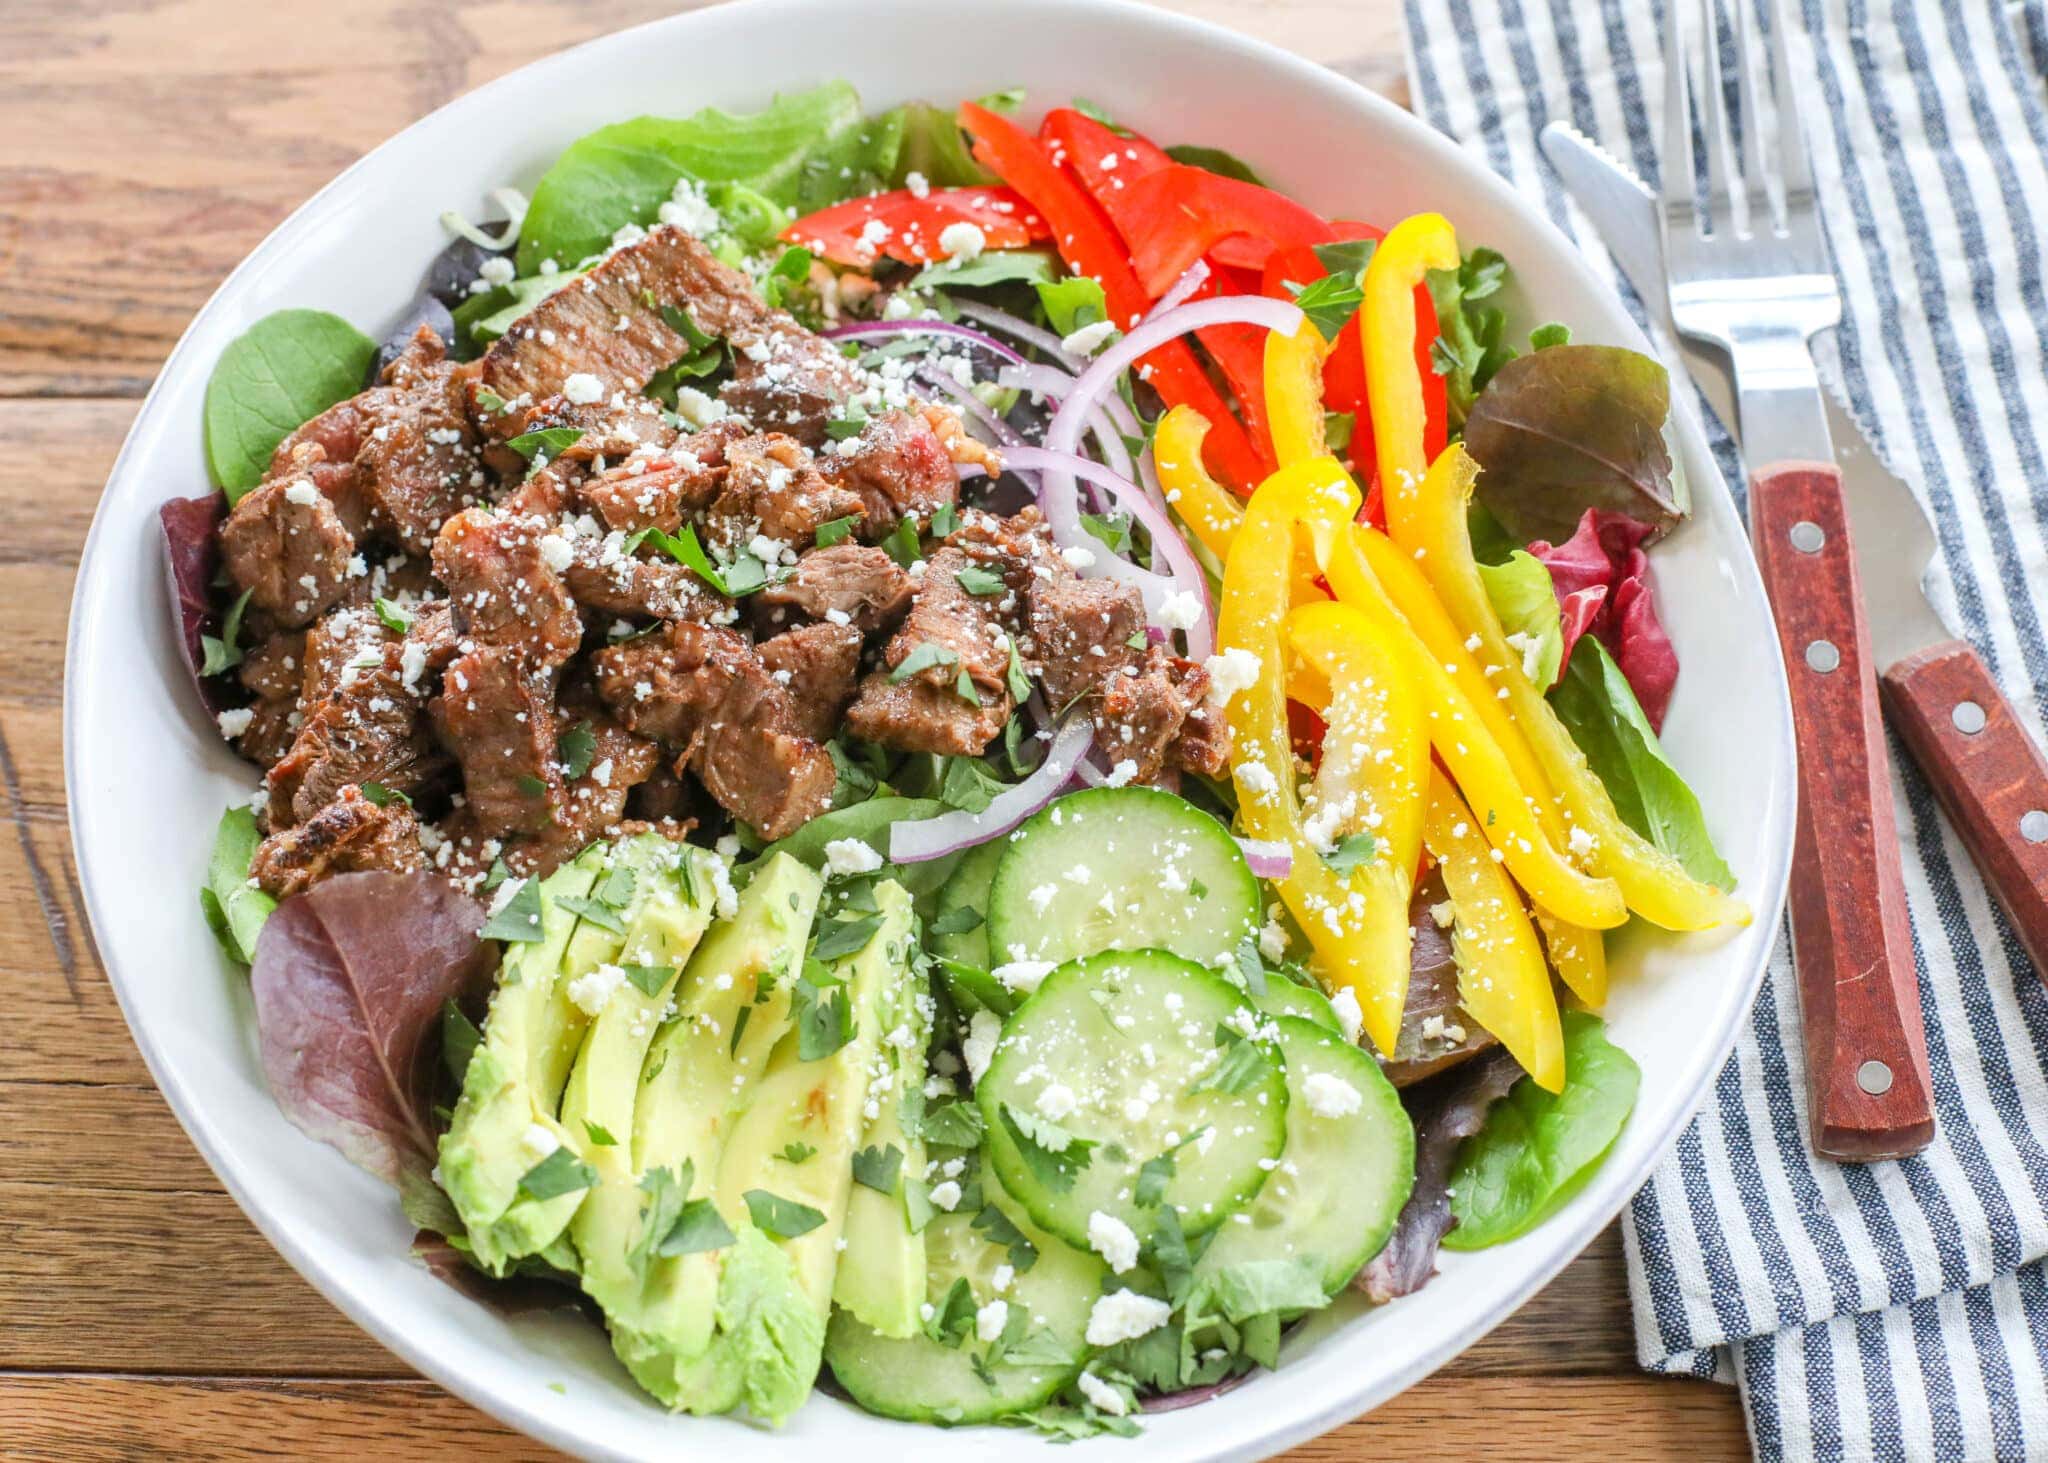 Steak Salad with Chipotle-Lime Dressing